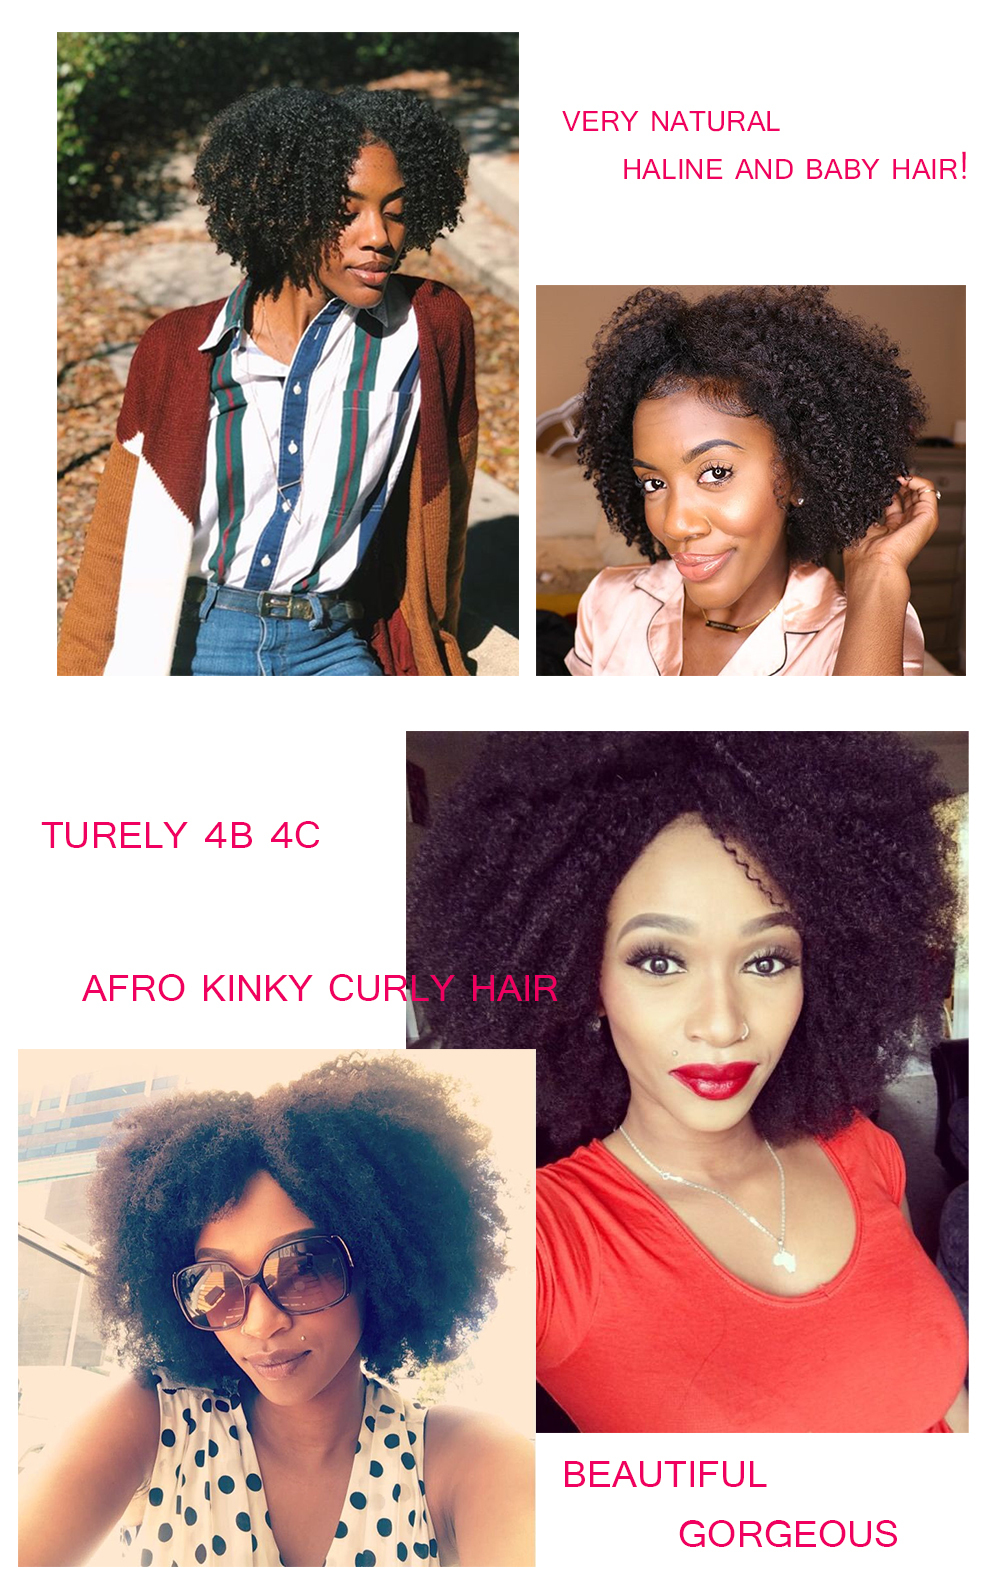 Afro Kinky Curly Lace Front Wig 13x6 Short Bob Human Hair Wigs 180 DensityWig Brazilian Frontal Wig 